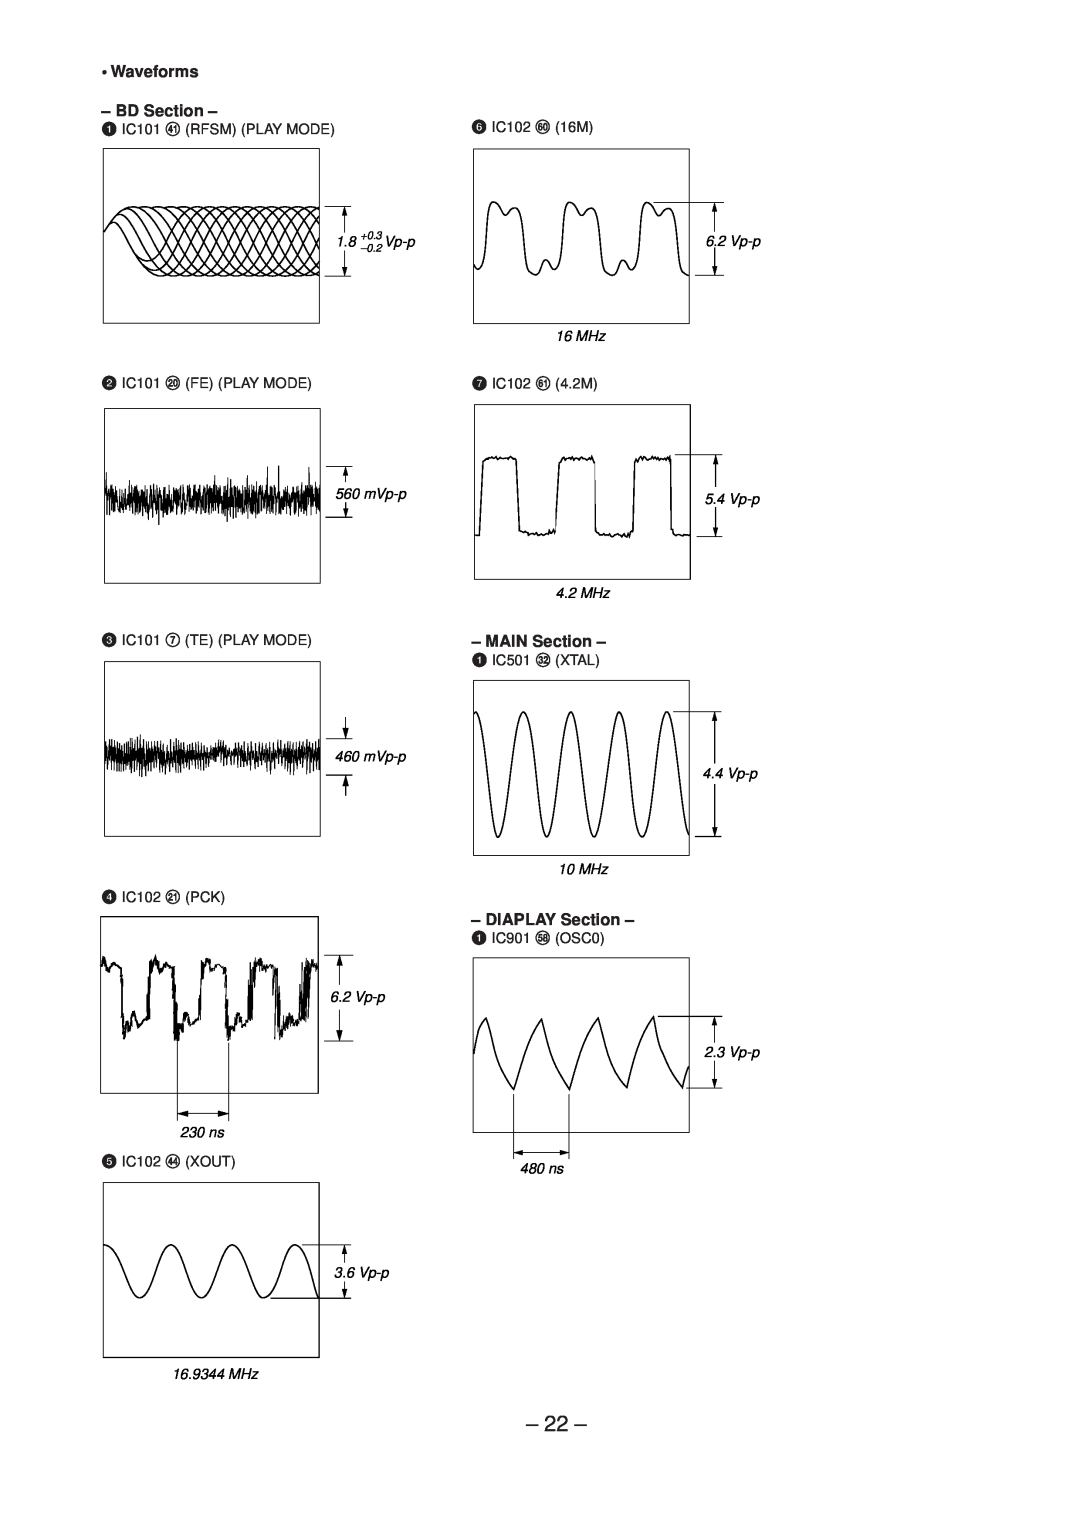 Technicolor - Thomson CDP-CX57 service manual Waveforms - BD Section, MAIN Section, DIAPLAY Section 